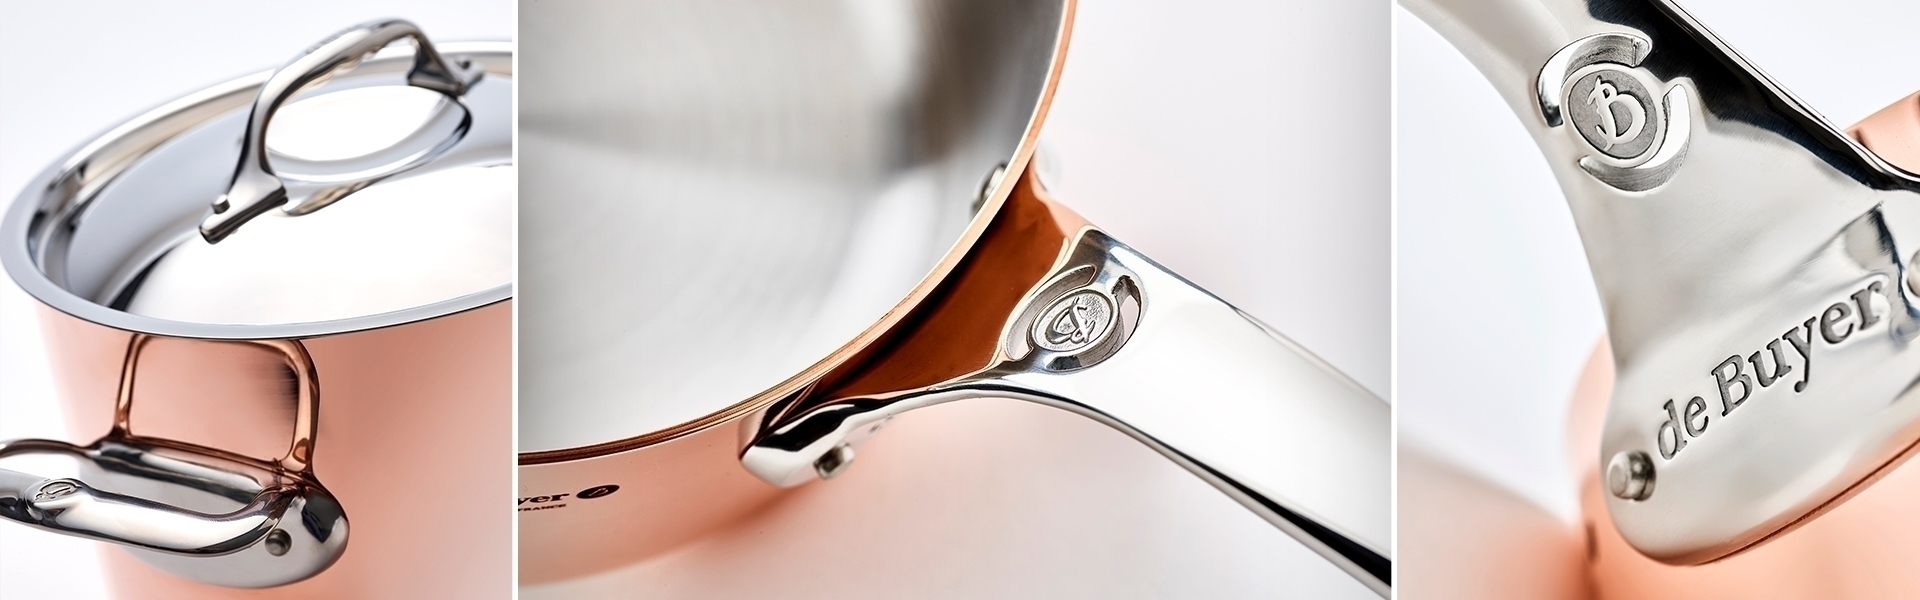 PRIMA MATERA - Induction-suitable copper cookware